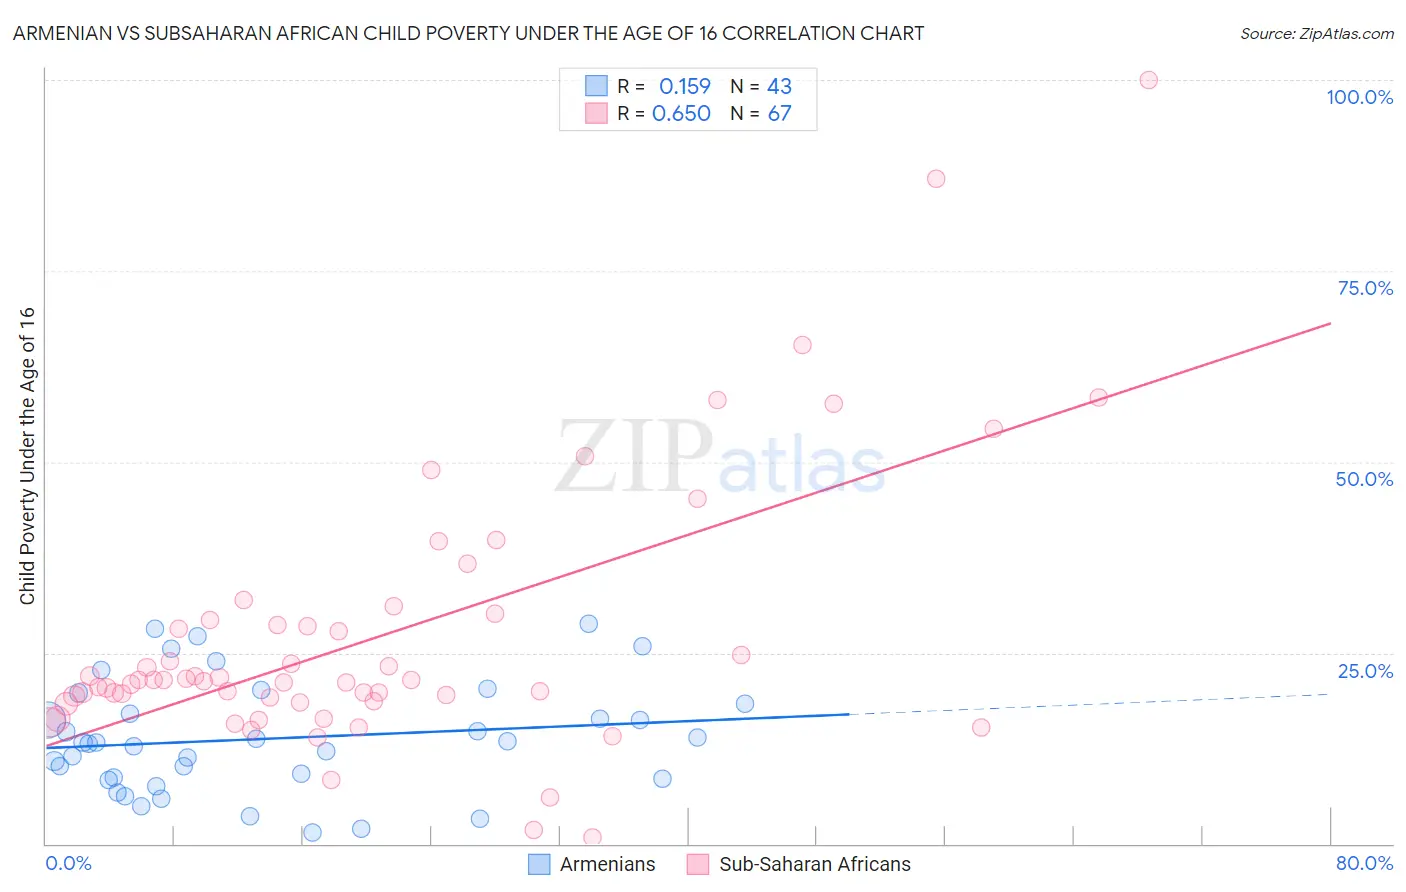 Armenian vs Subsaharan African Child Poverty Under the Age of 16